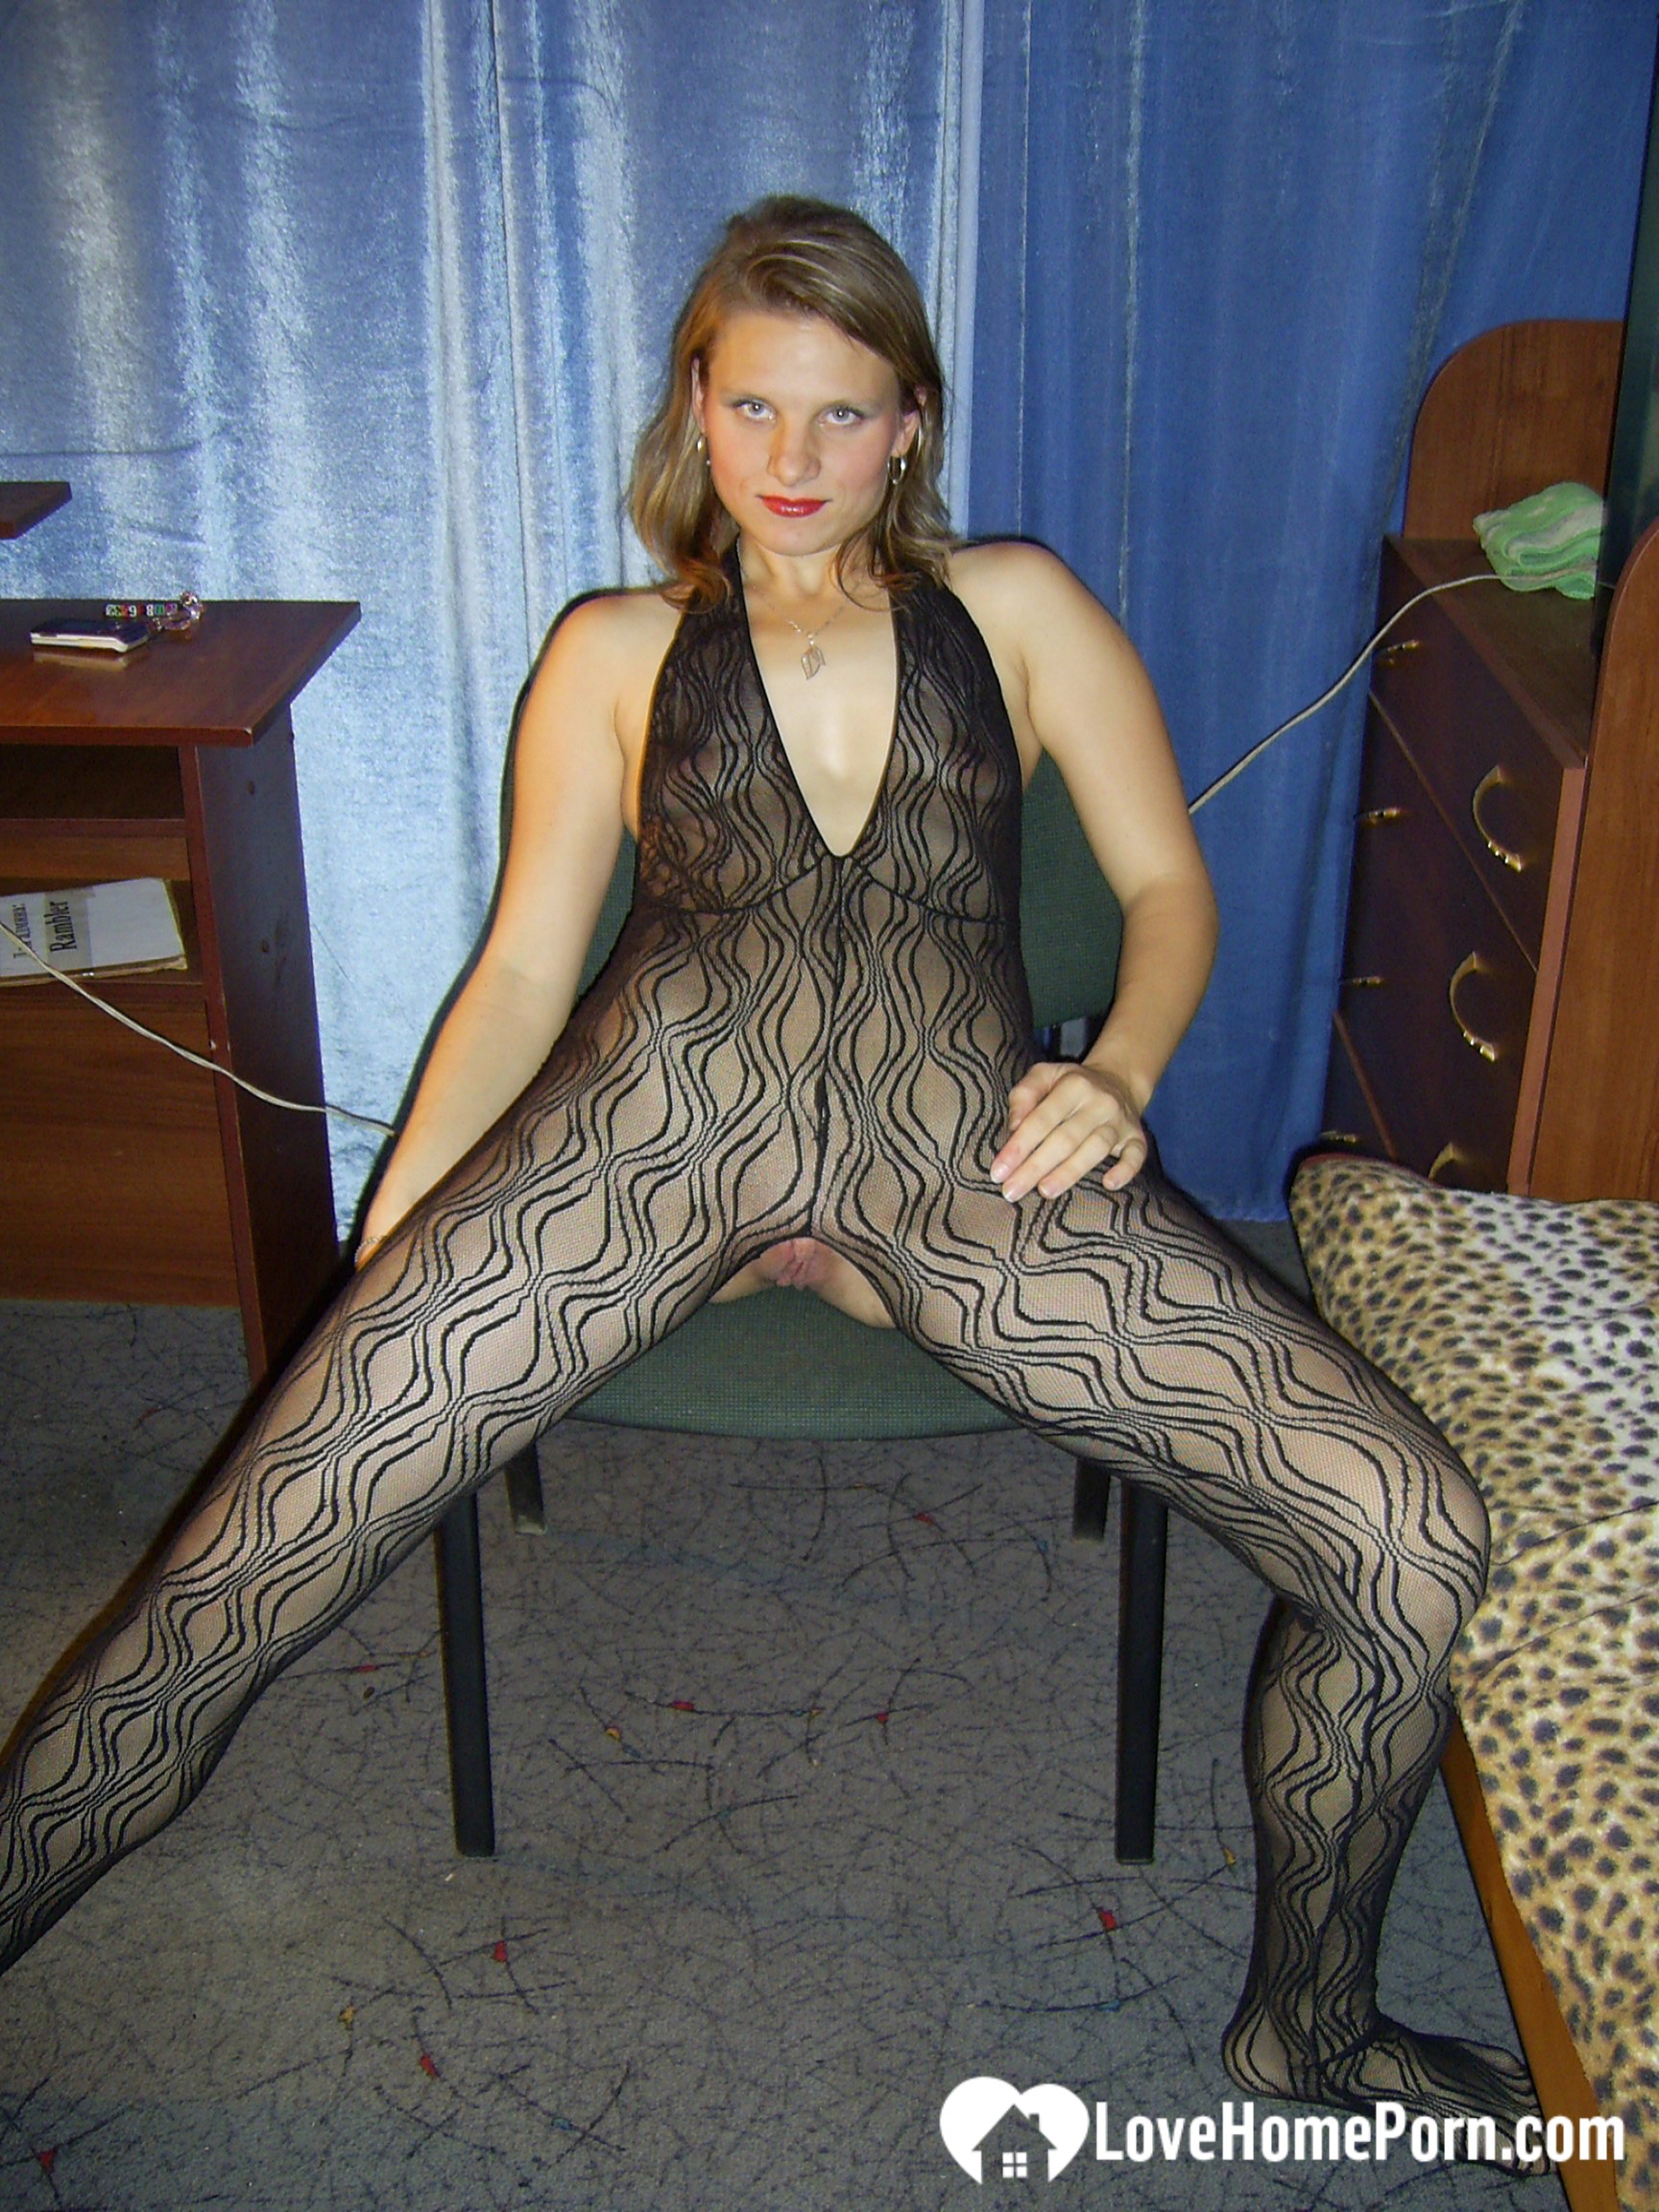 Kinky girlfriend in pantyhose fools around the apartment